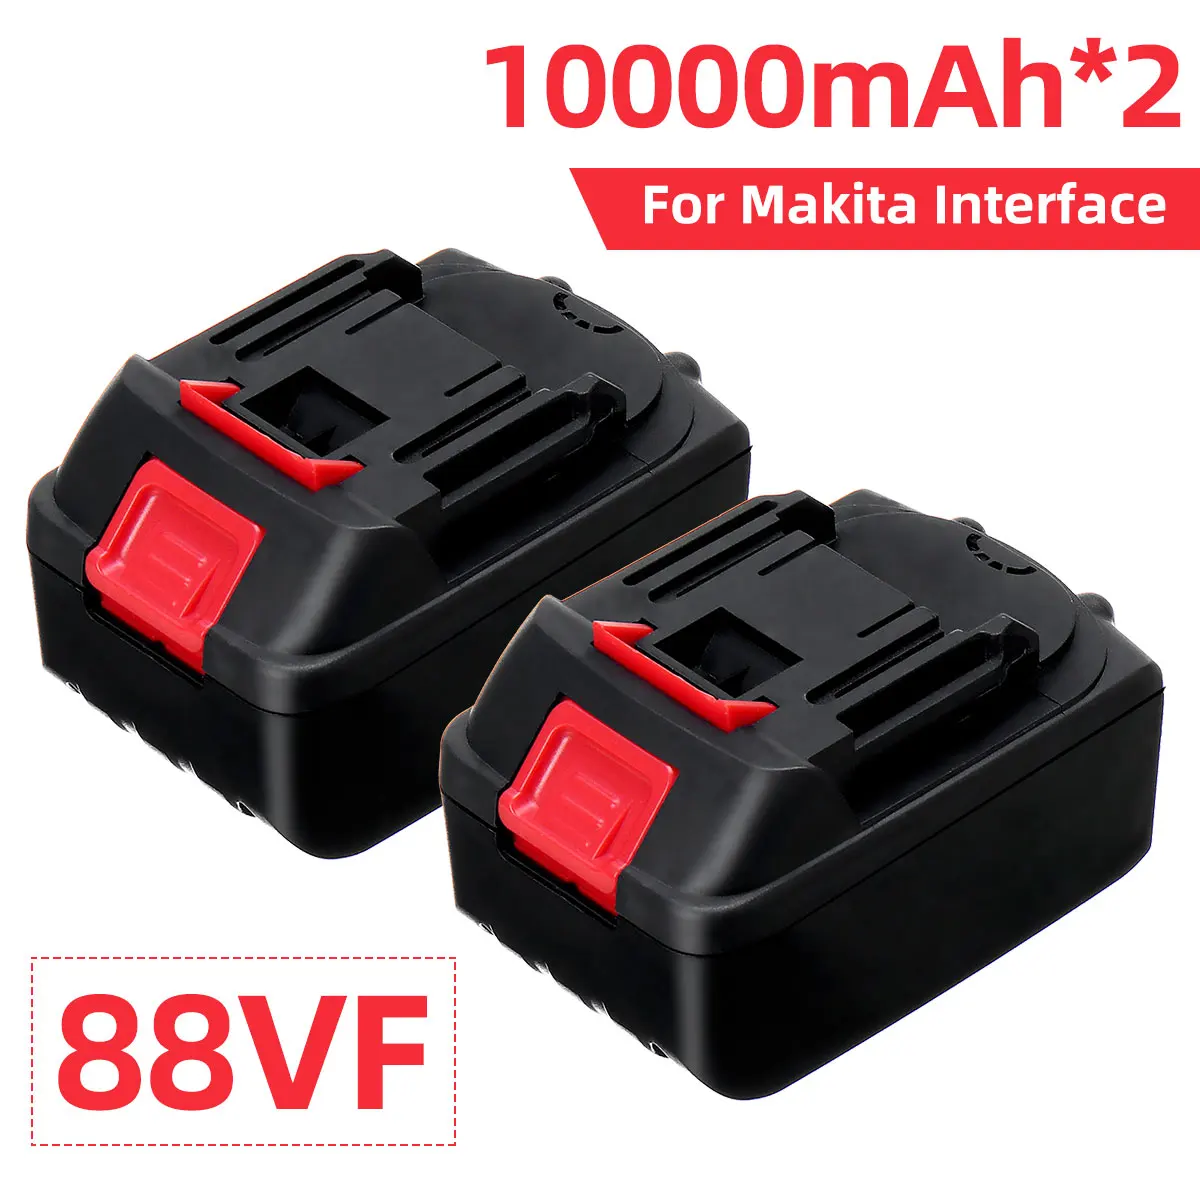 

2Pcs 88VF 10000mAh Lithium Battery for Makita Interface Rechargeable Battery for Electric Drill Wrench Angle Grinder Power Tool